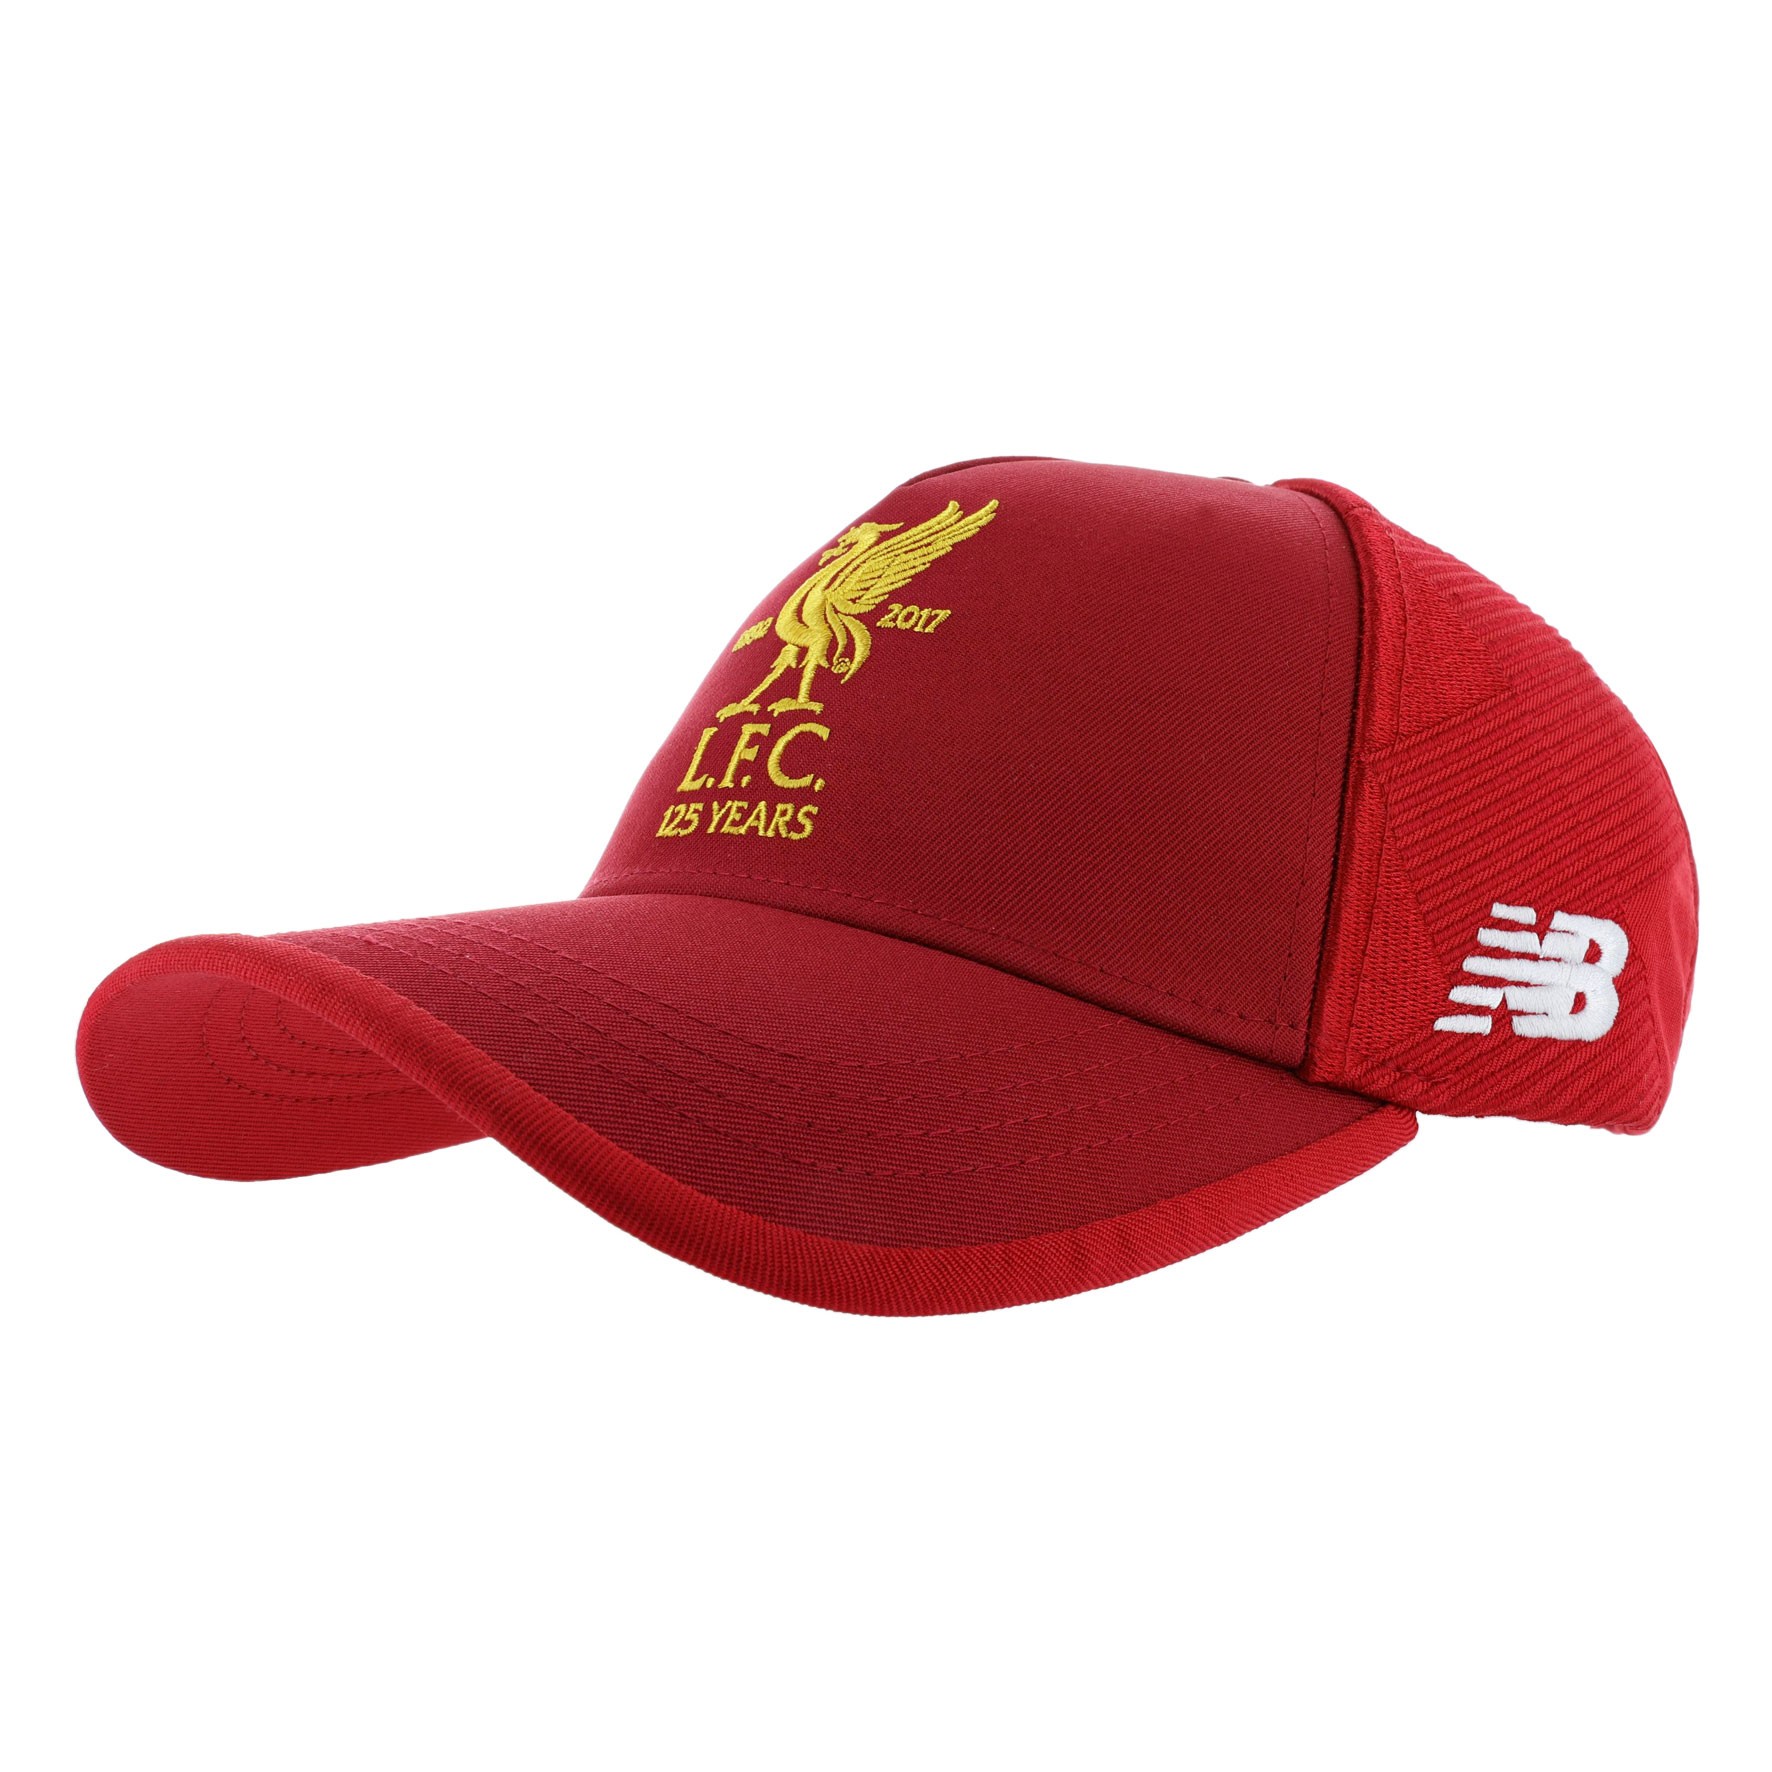 Red 125 Cap 17/18 | Anfield Shop